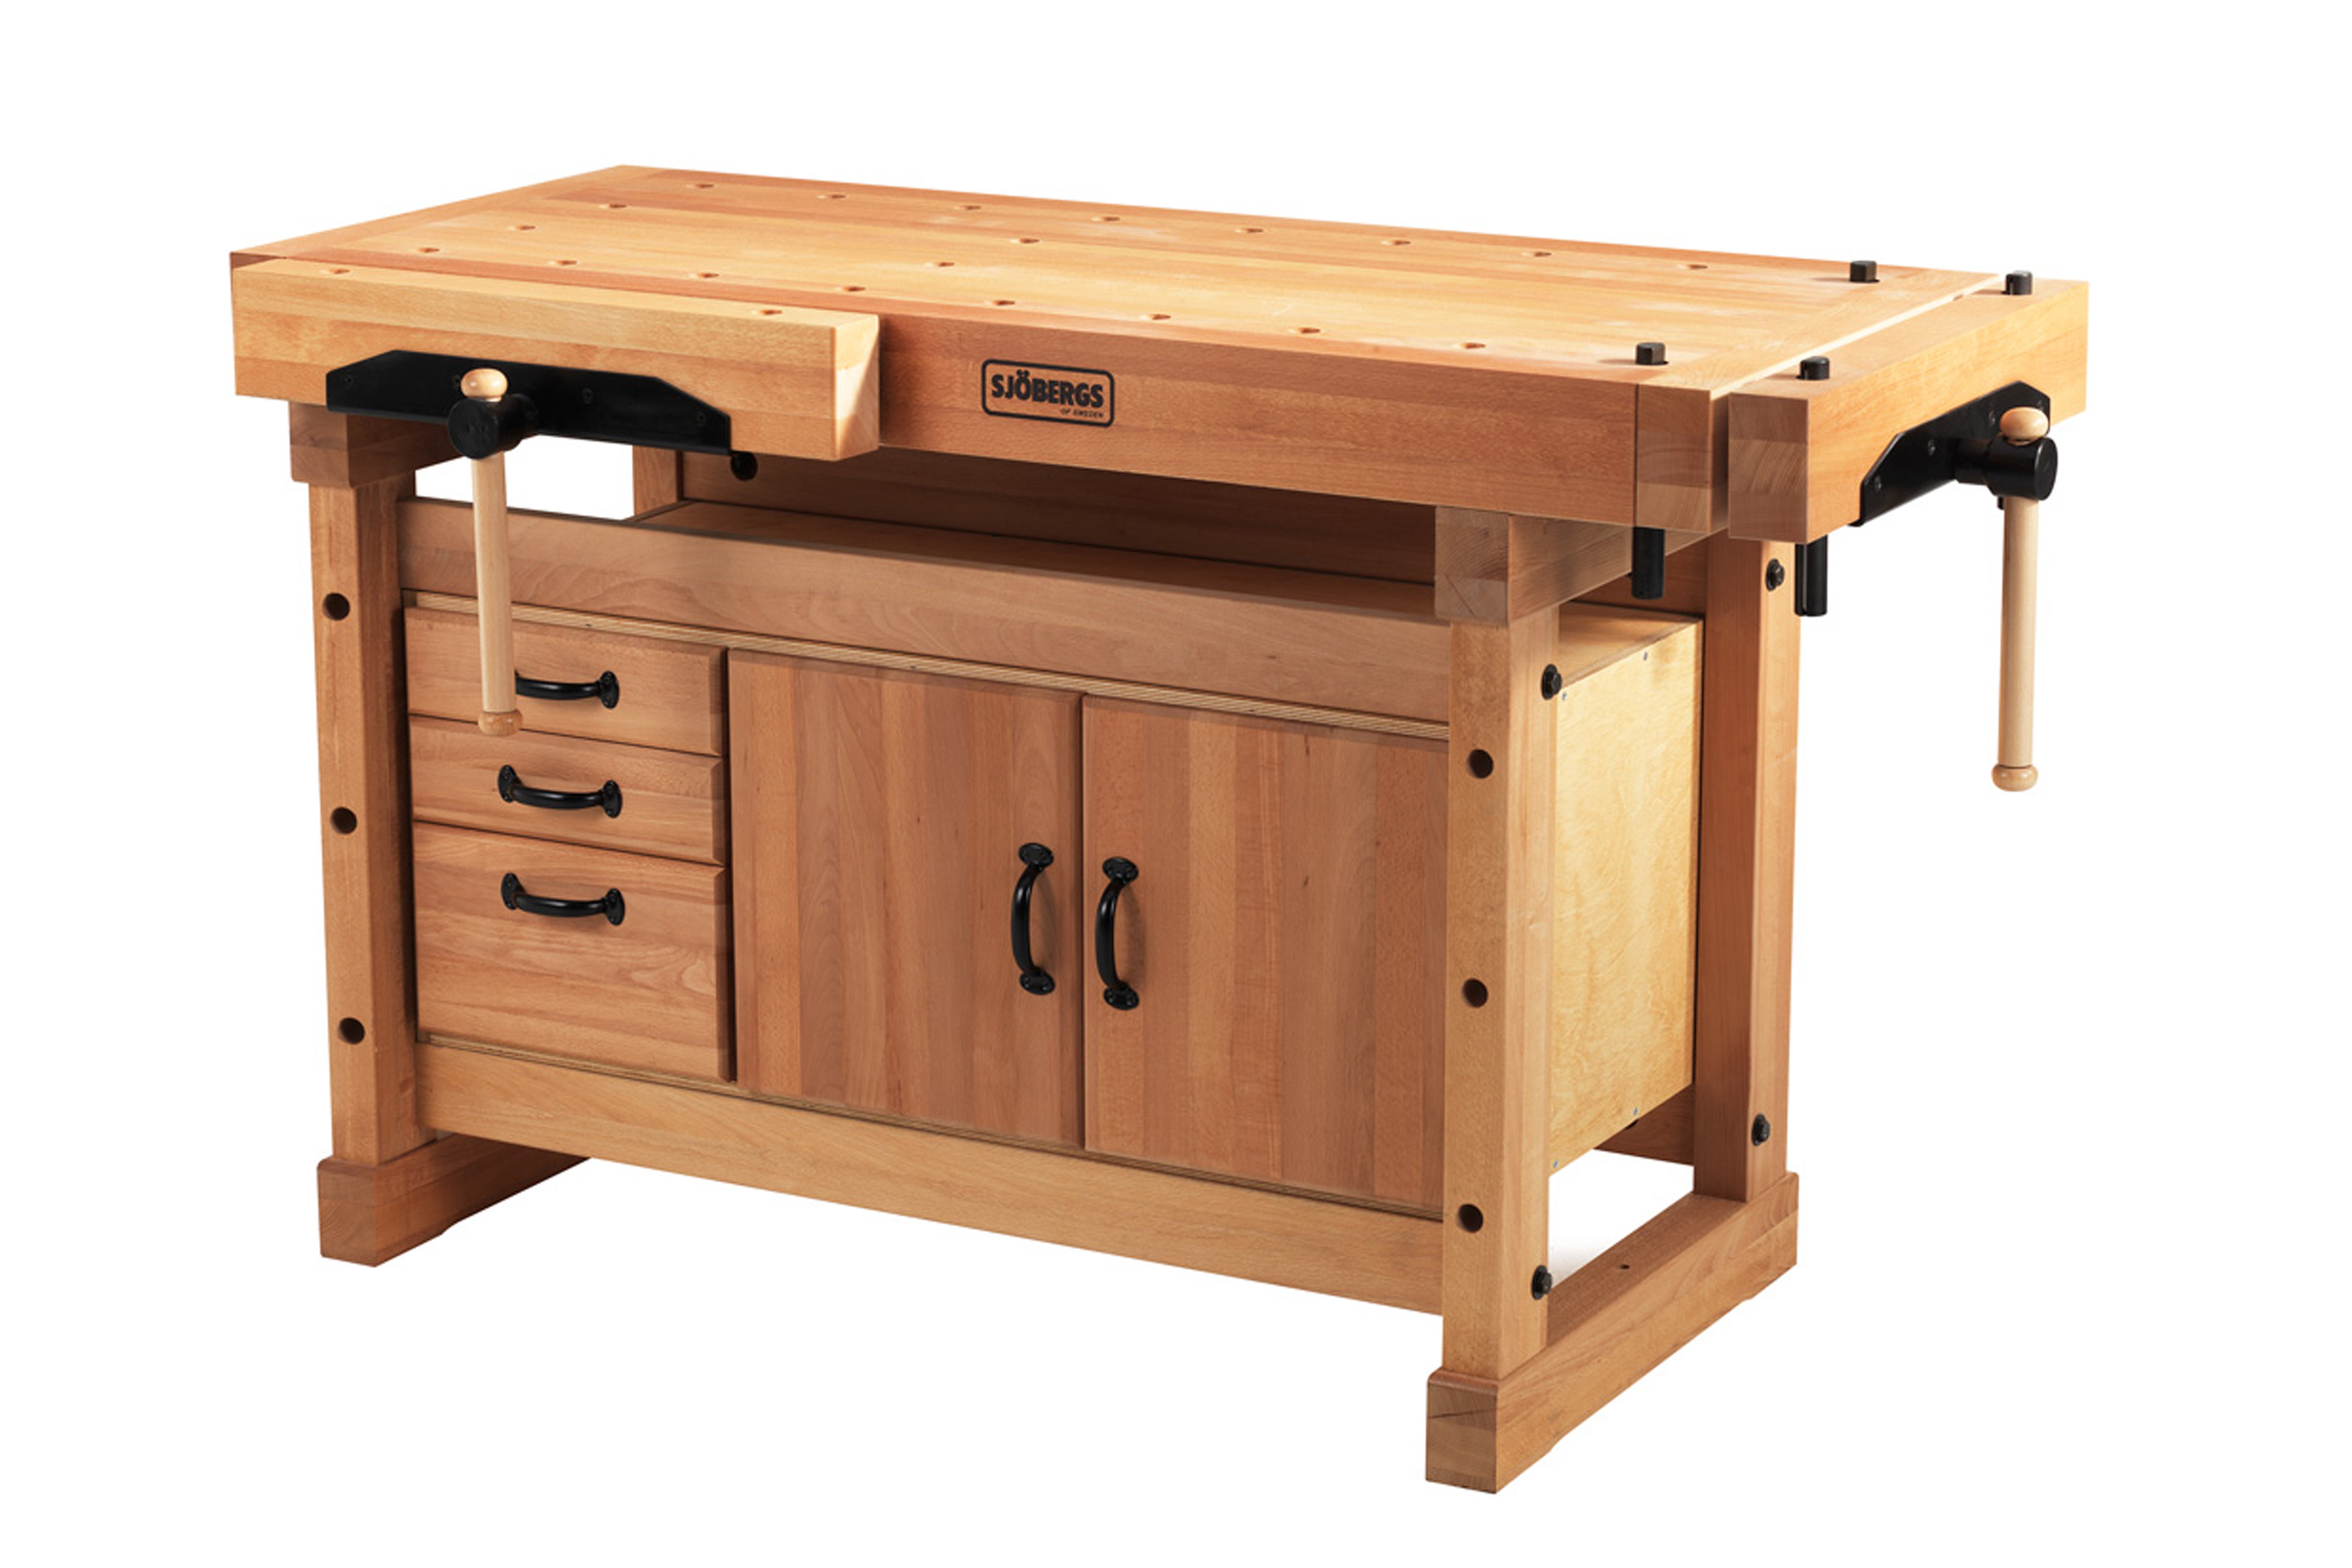 Elite 1500 workbench with base cabinet